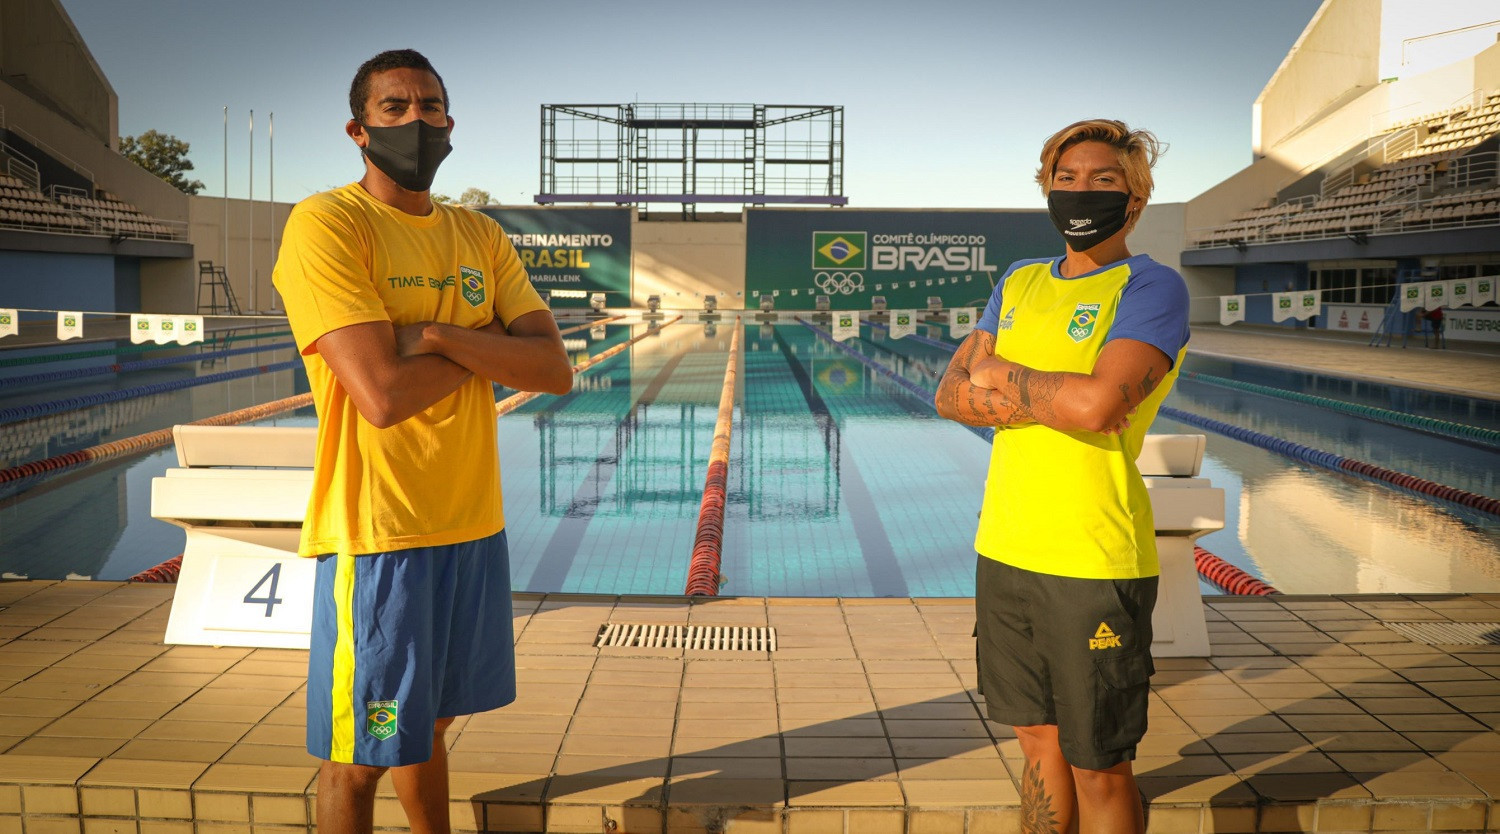 Marathon swimmers Ana Marcela Cunha and Allan do Carmo were among those to return to the Team Brazil Training Center as it reopened ©COB